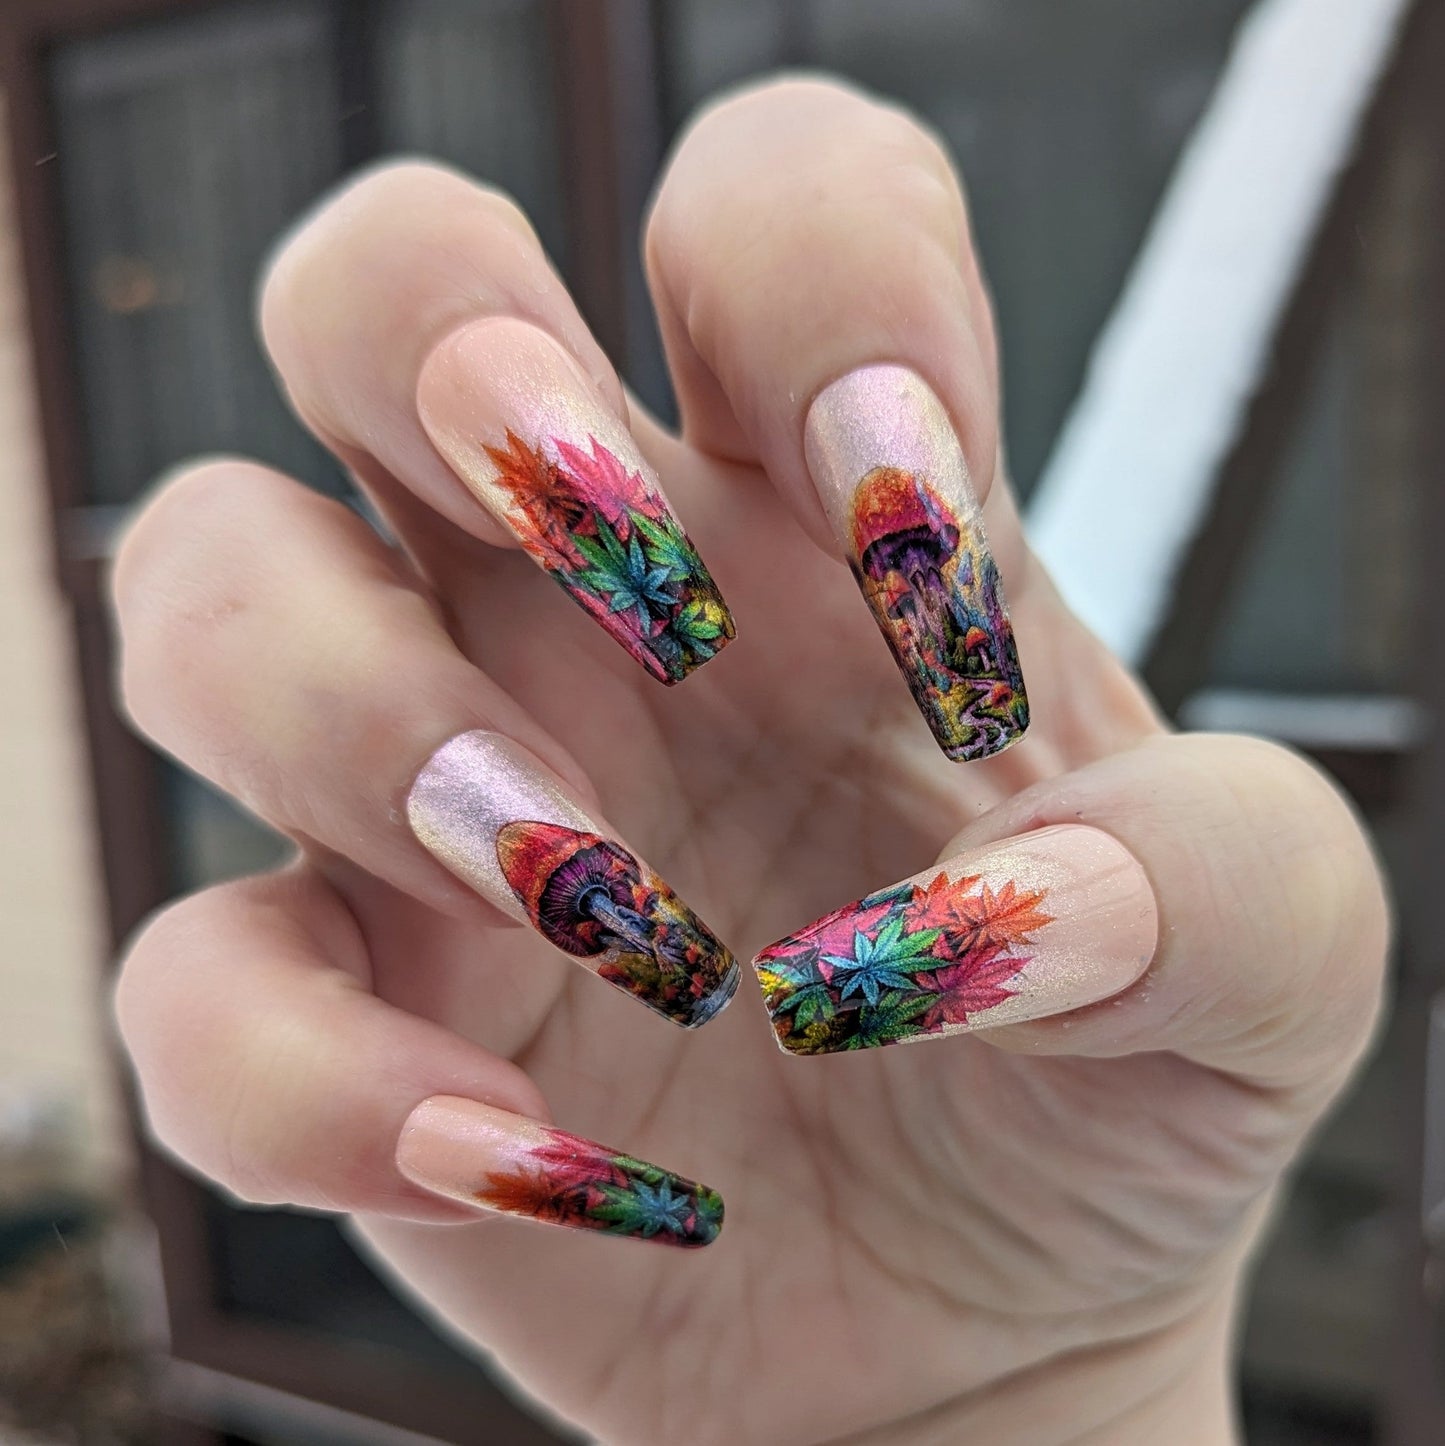 In The Weeds  - Decals For Nails